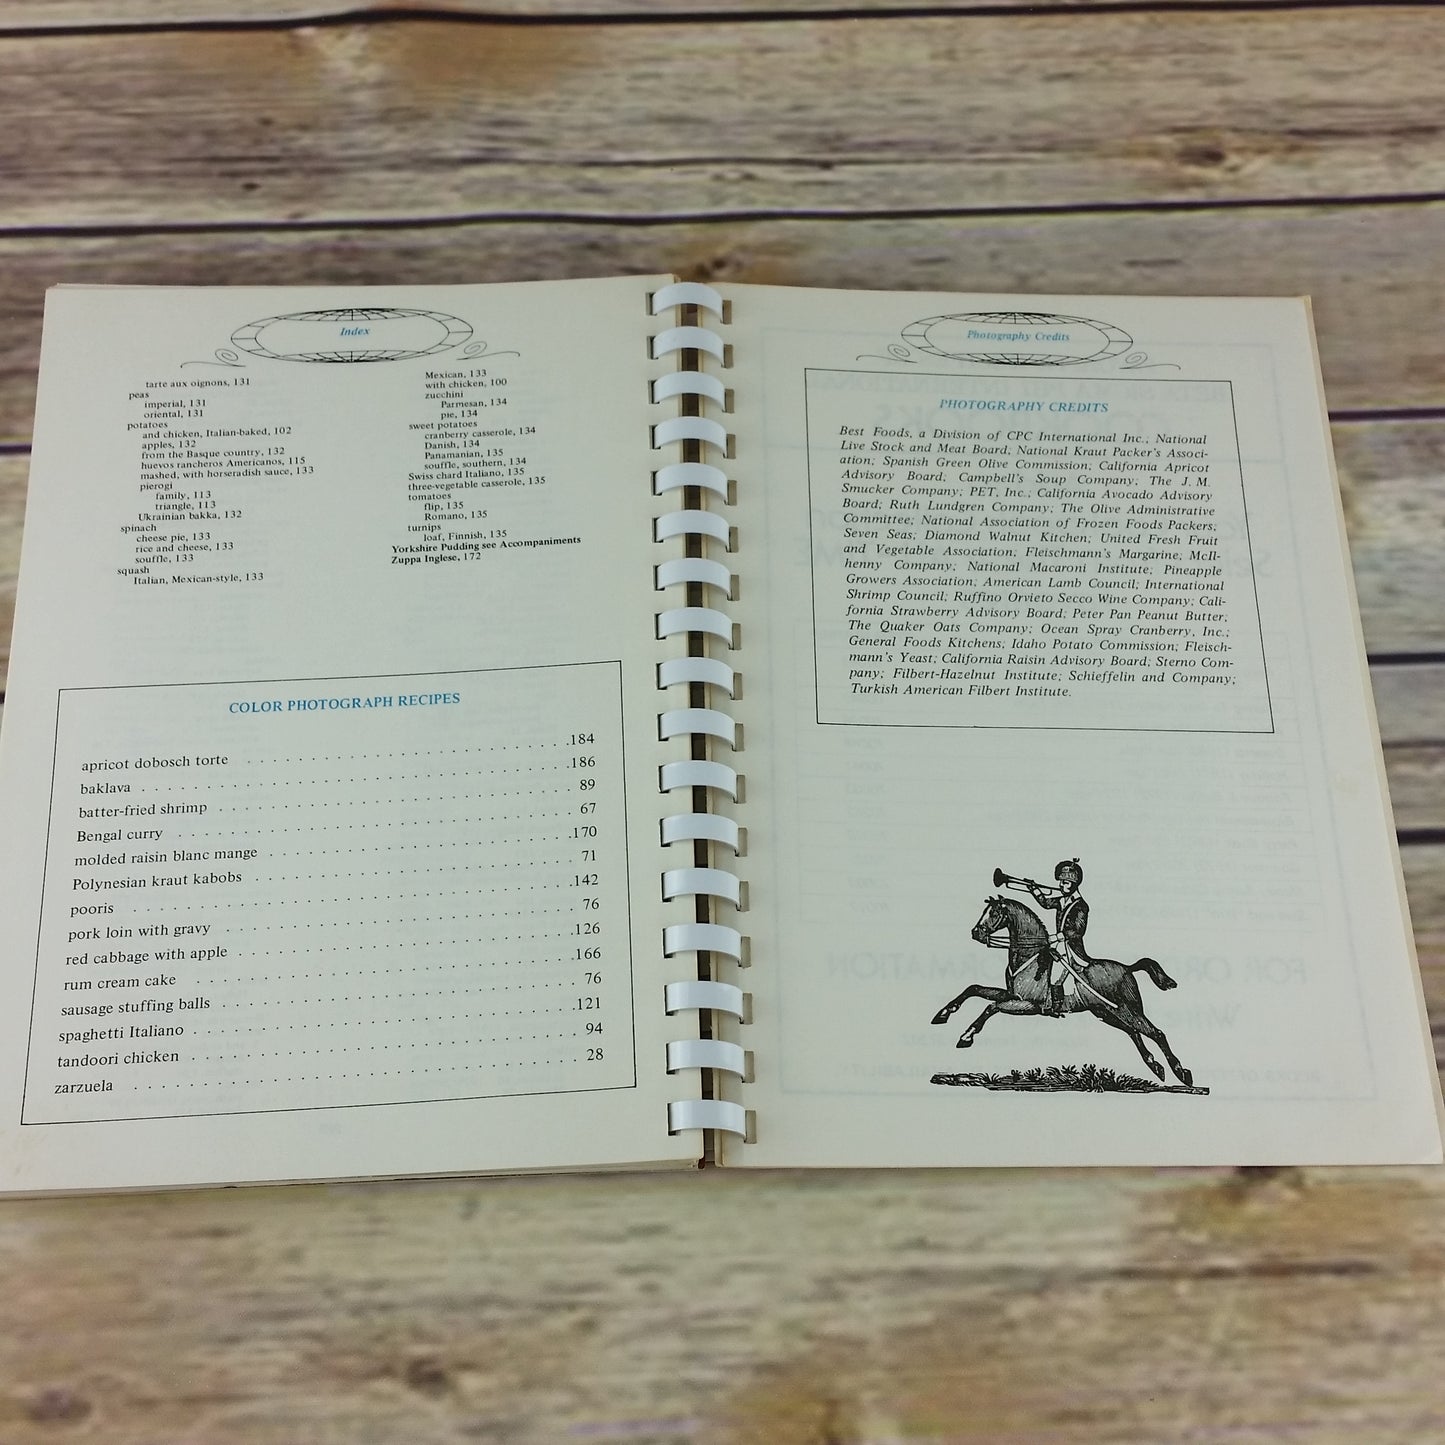 Vintage Sorority Cookbook Beta Sigma Phi Recipes from the World 1968 Spiral Bound - At Grandma's Table